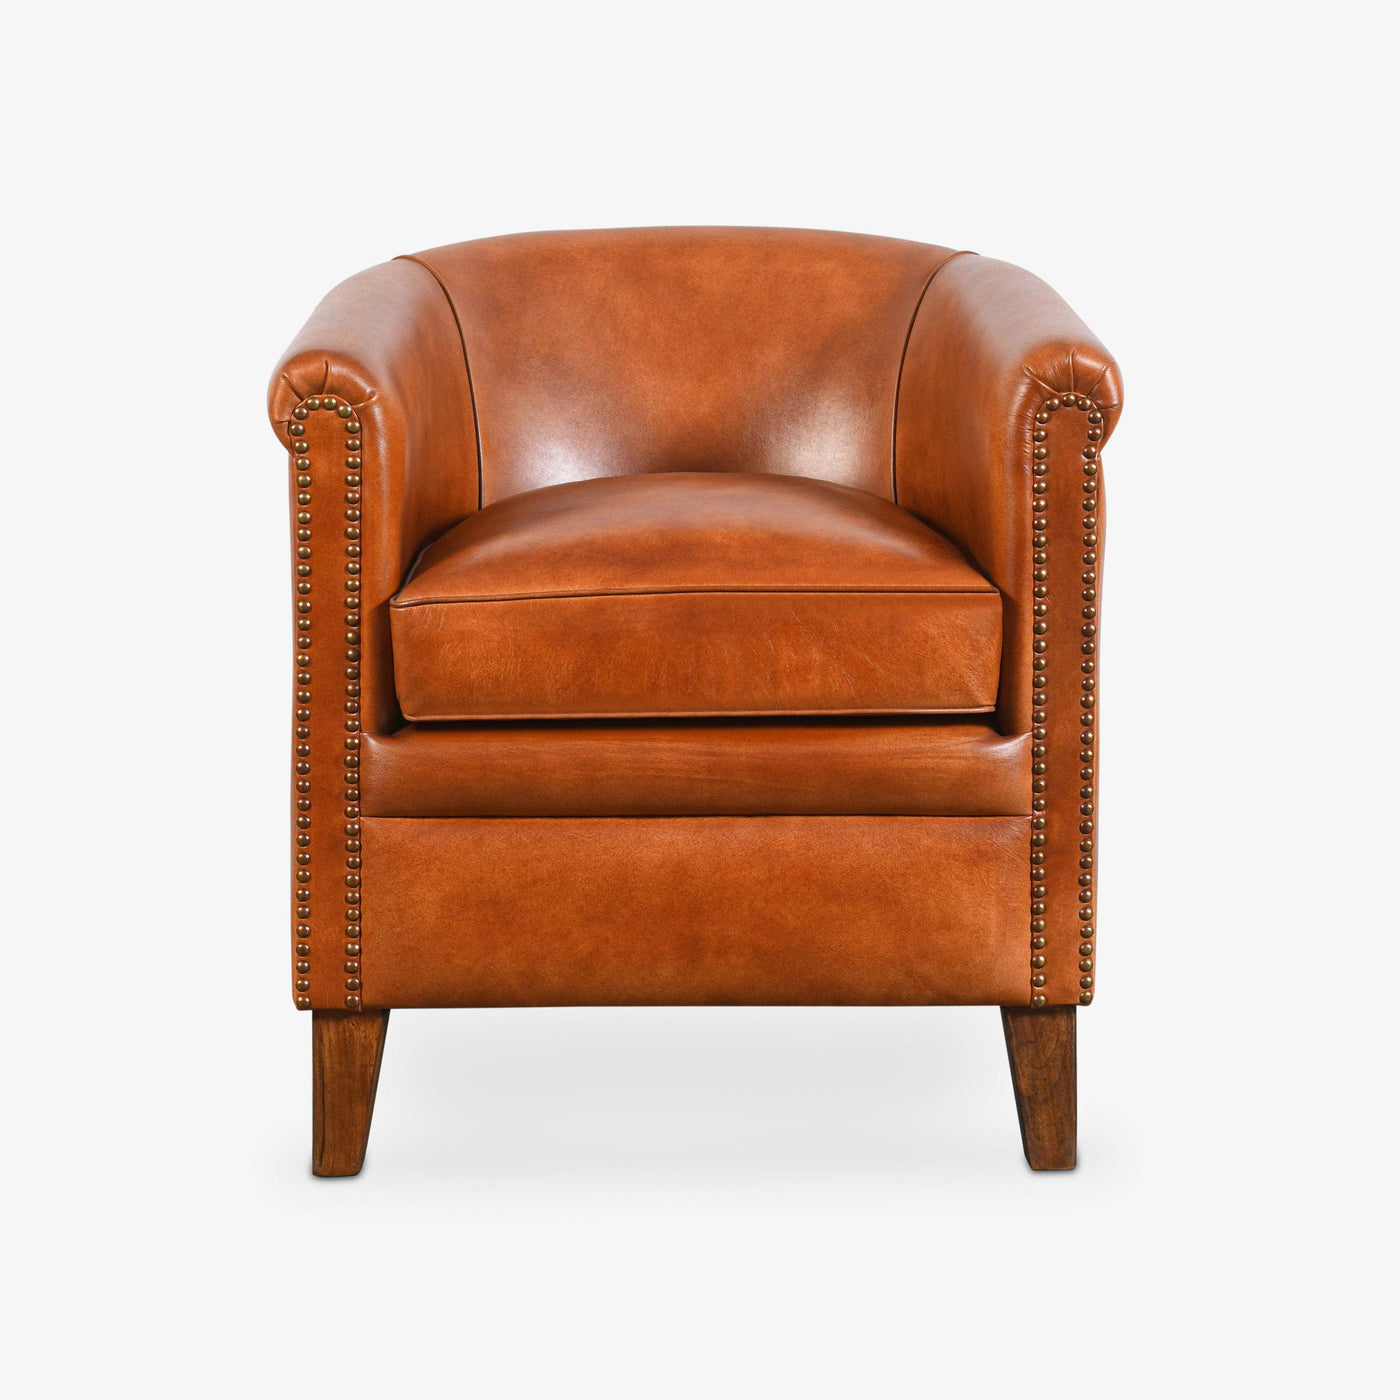 Leather Wood Armchair, Brown, 67x67x74 cm - 1